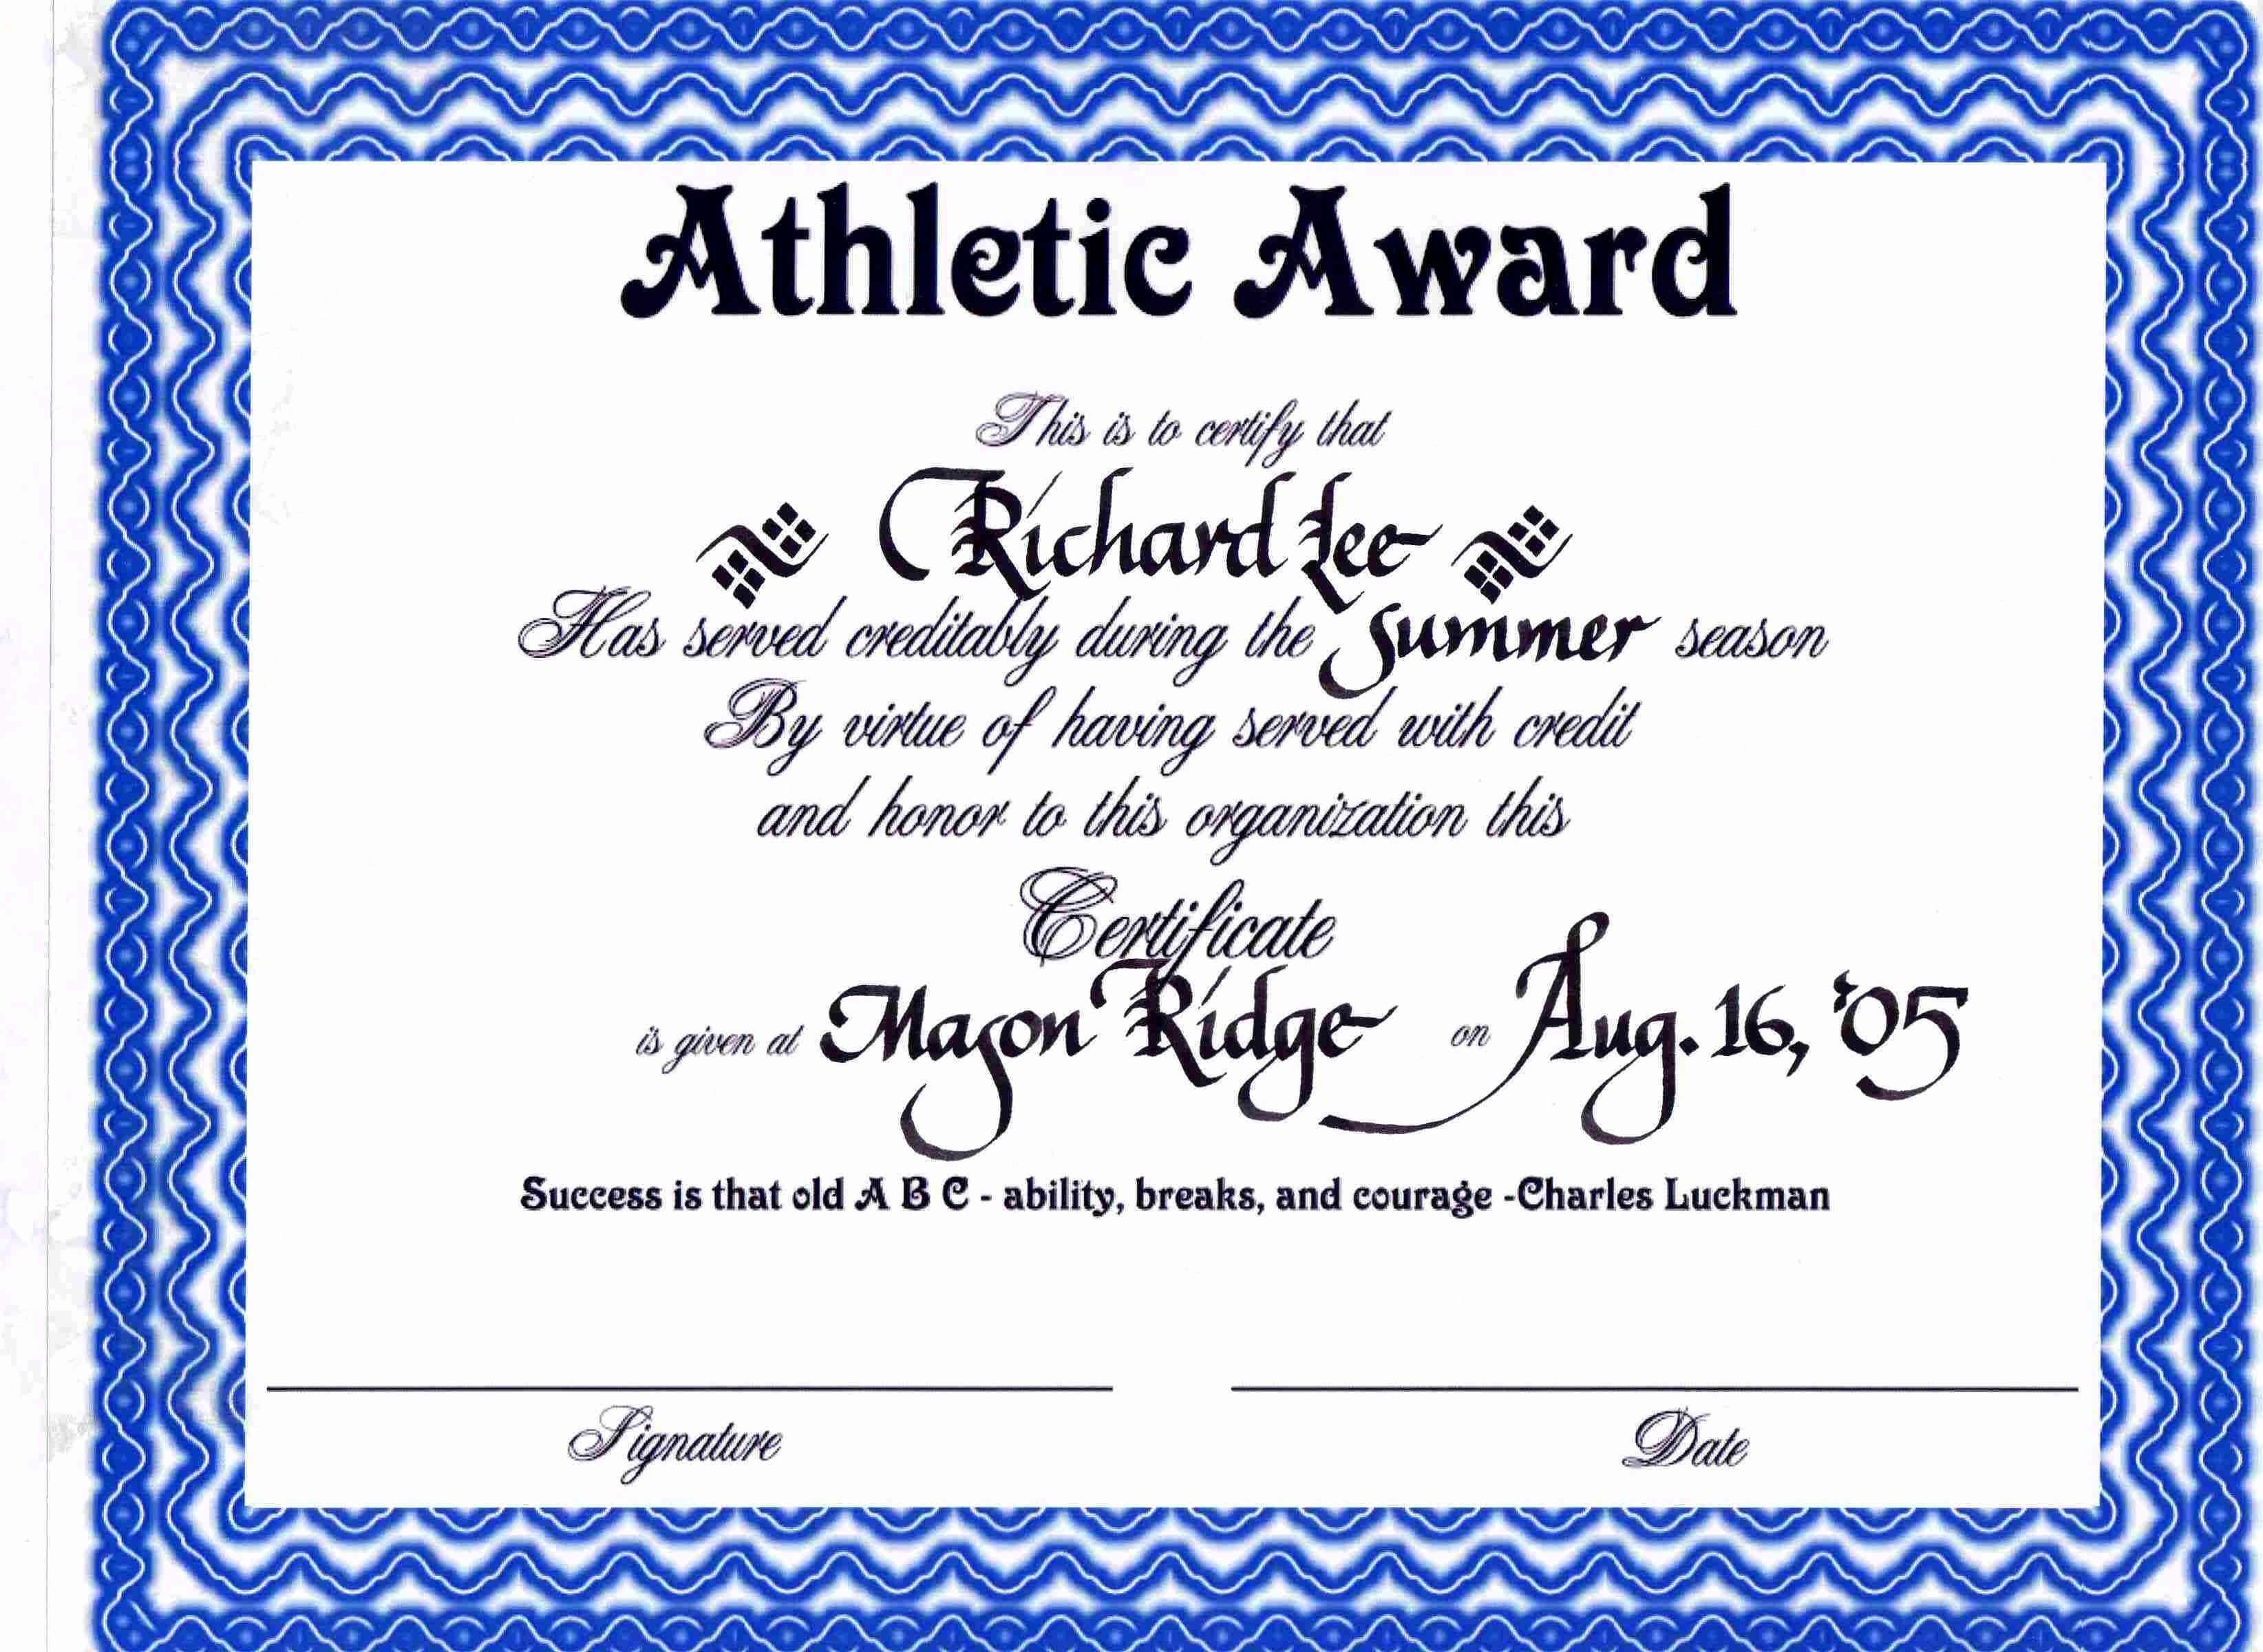 30 Sports Awards Certificate Template | Pryncepality With Regard To Sports Award Certificate Template Word